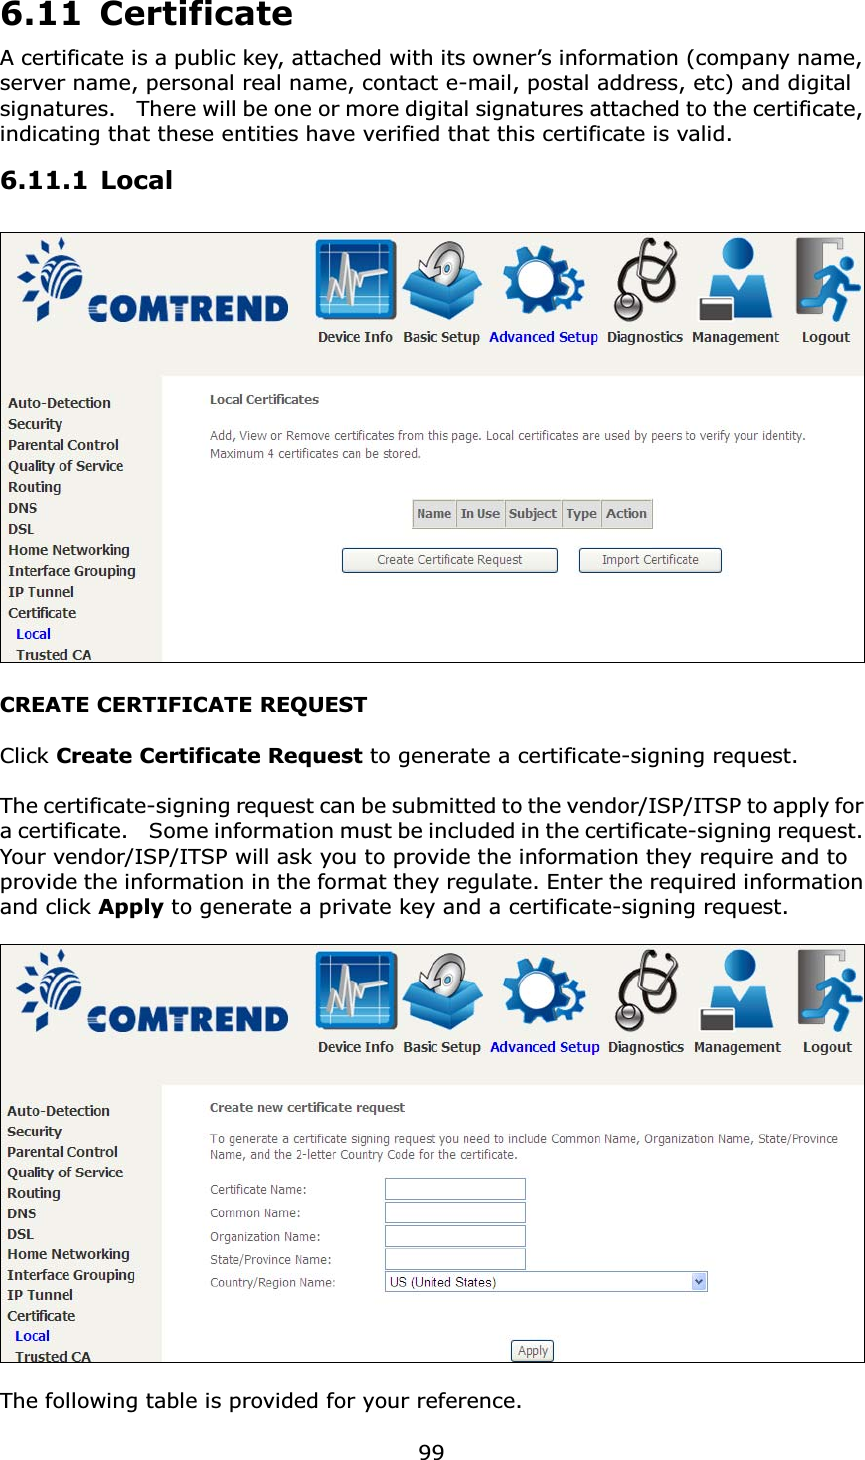 996.11 CertificateA certificate is a public key, attached with its owner’s information (company name, server name, personal real name, contact e-mail, postal address, etc) and digital signatures.    There will be one or more digital signatures attached to the certificate, indicating that these entities have verified that this certificate is valid.6.11.1 LocalCREATE CERTIFICATE REQUESTClick Create Certificate Request to generate a certificate-signing request. The certificate-signing request can be submitted to the vendor/ISP/ITSP to apply for a certificate.    Some information must be included in the certificate-signing request.   Your vendor/ISP/ITSP will ask you to provide the information they require and to provide the information in the format they regulate. Enter the required information and click Apply to generate a private key and a certificate-signing request.   The following table is provided for your reference.